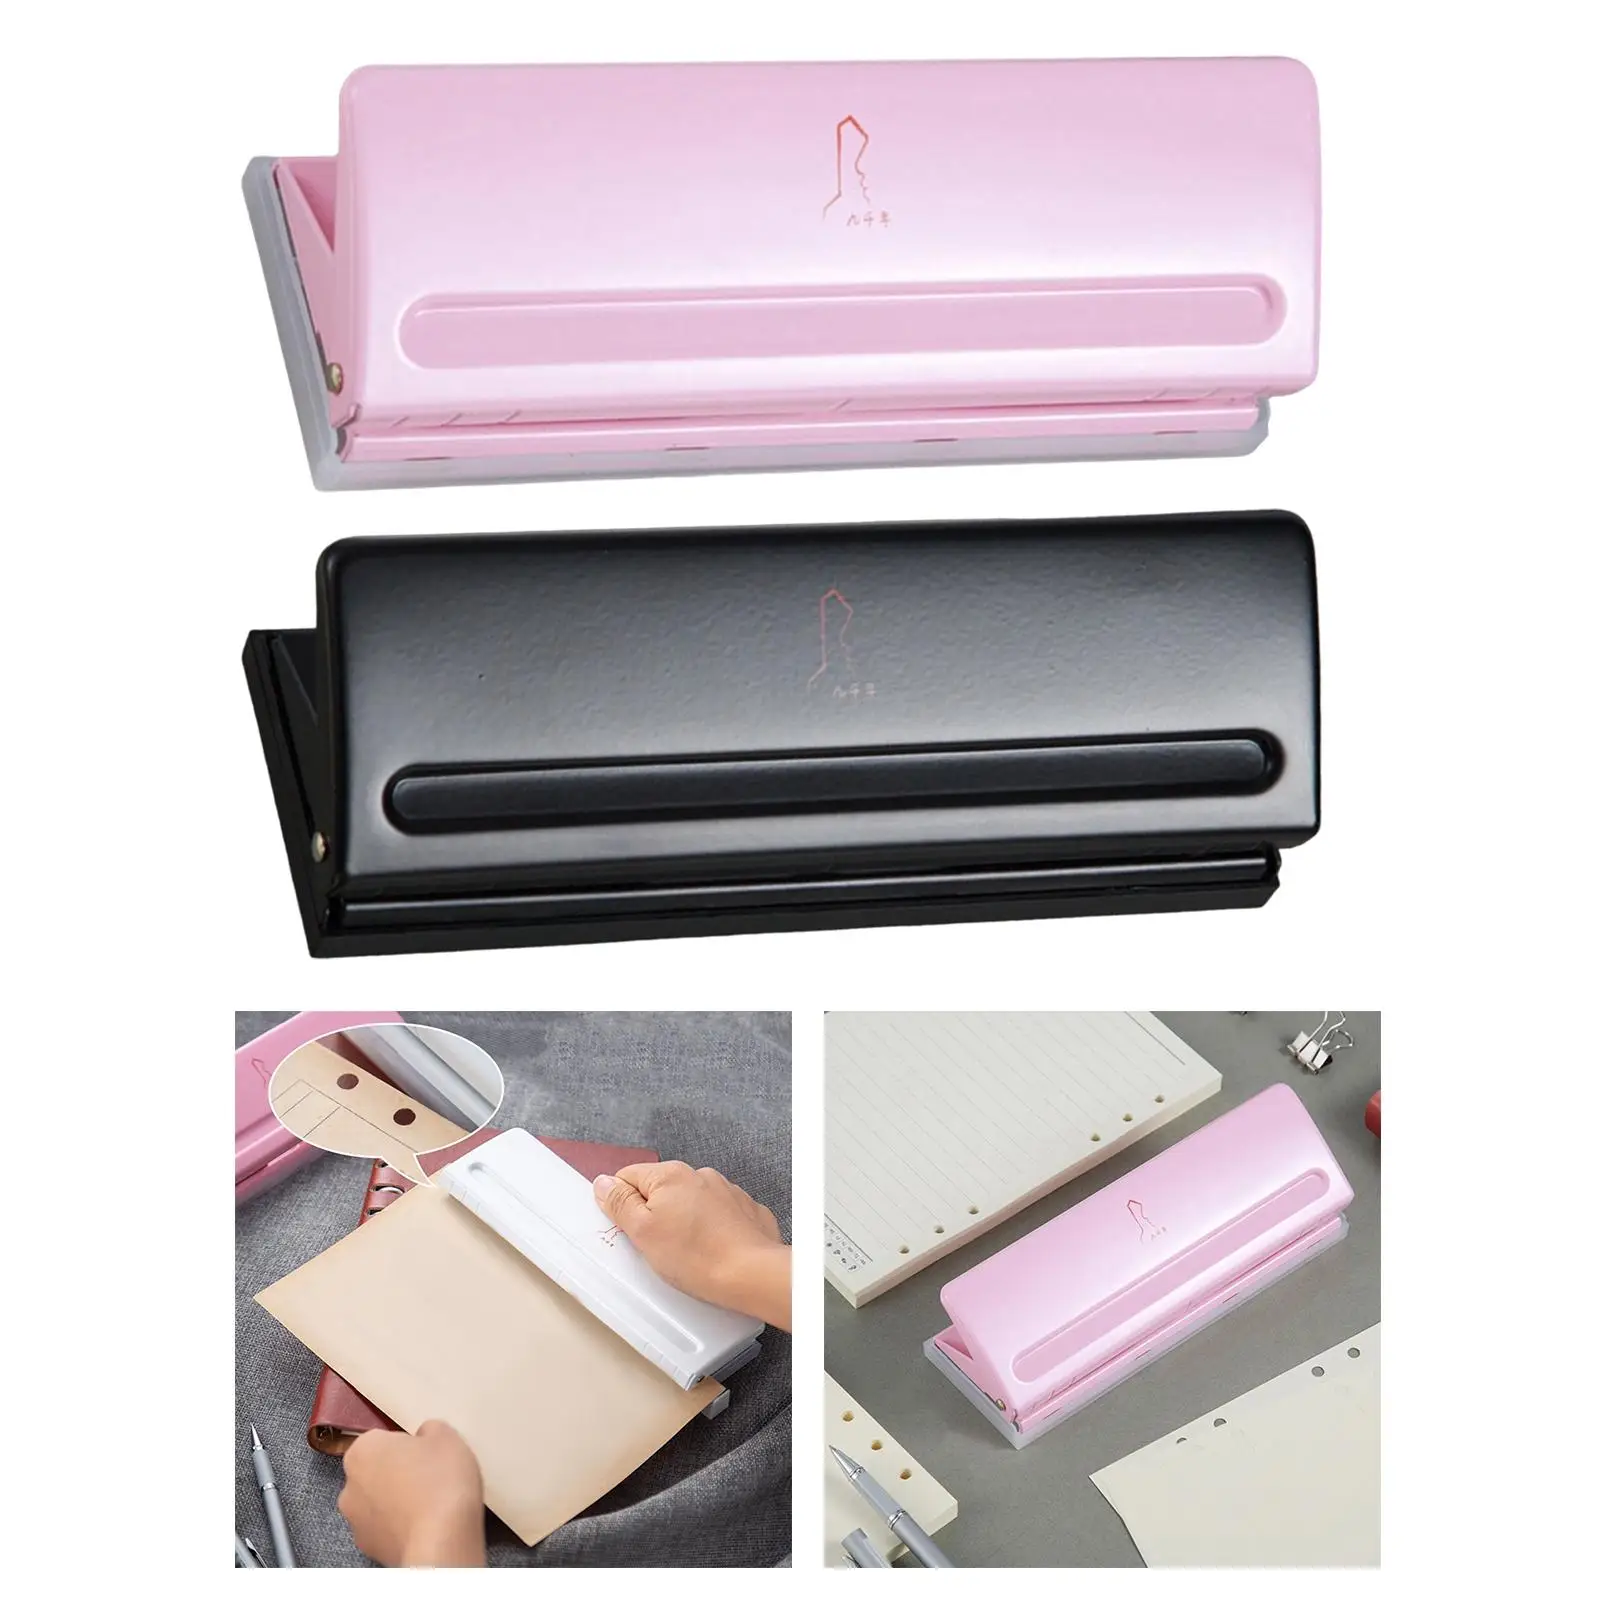 Desktop 6 Holes Punch Tool Hole Puncher Paper Punching Precision 8Sheets Paper,Paper Punch for DIY Scrapbook School, Card Making